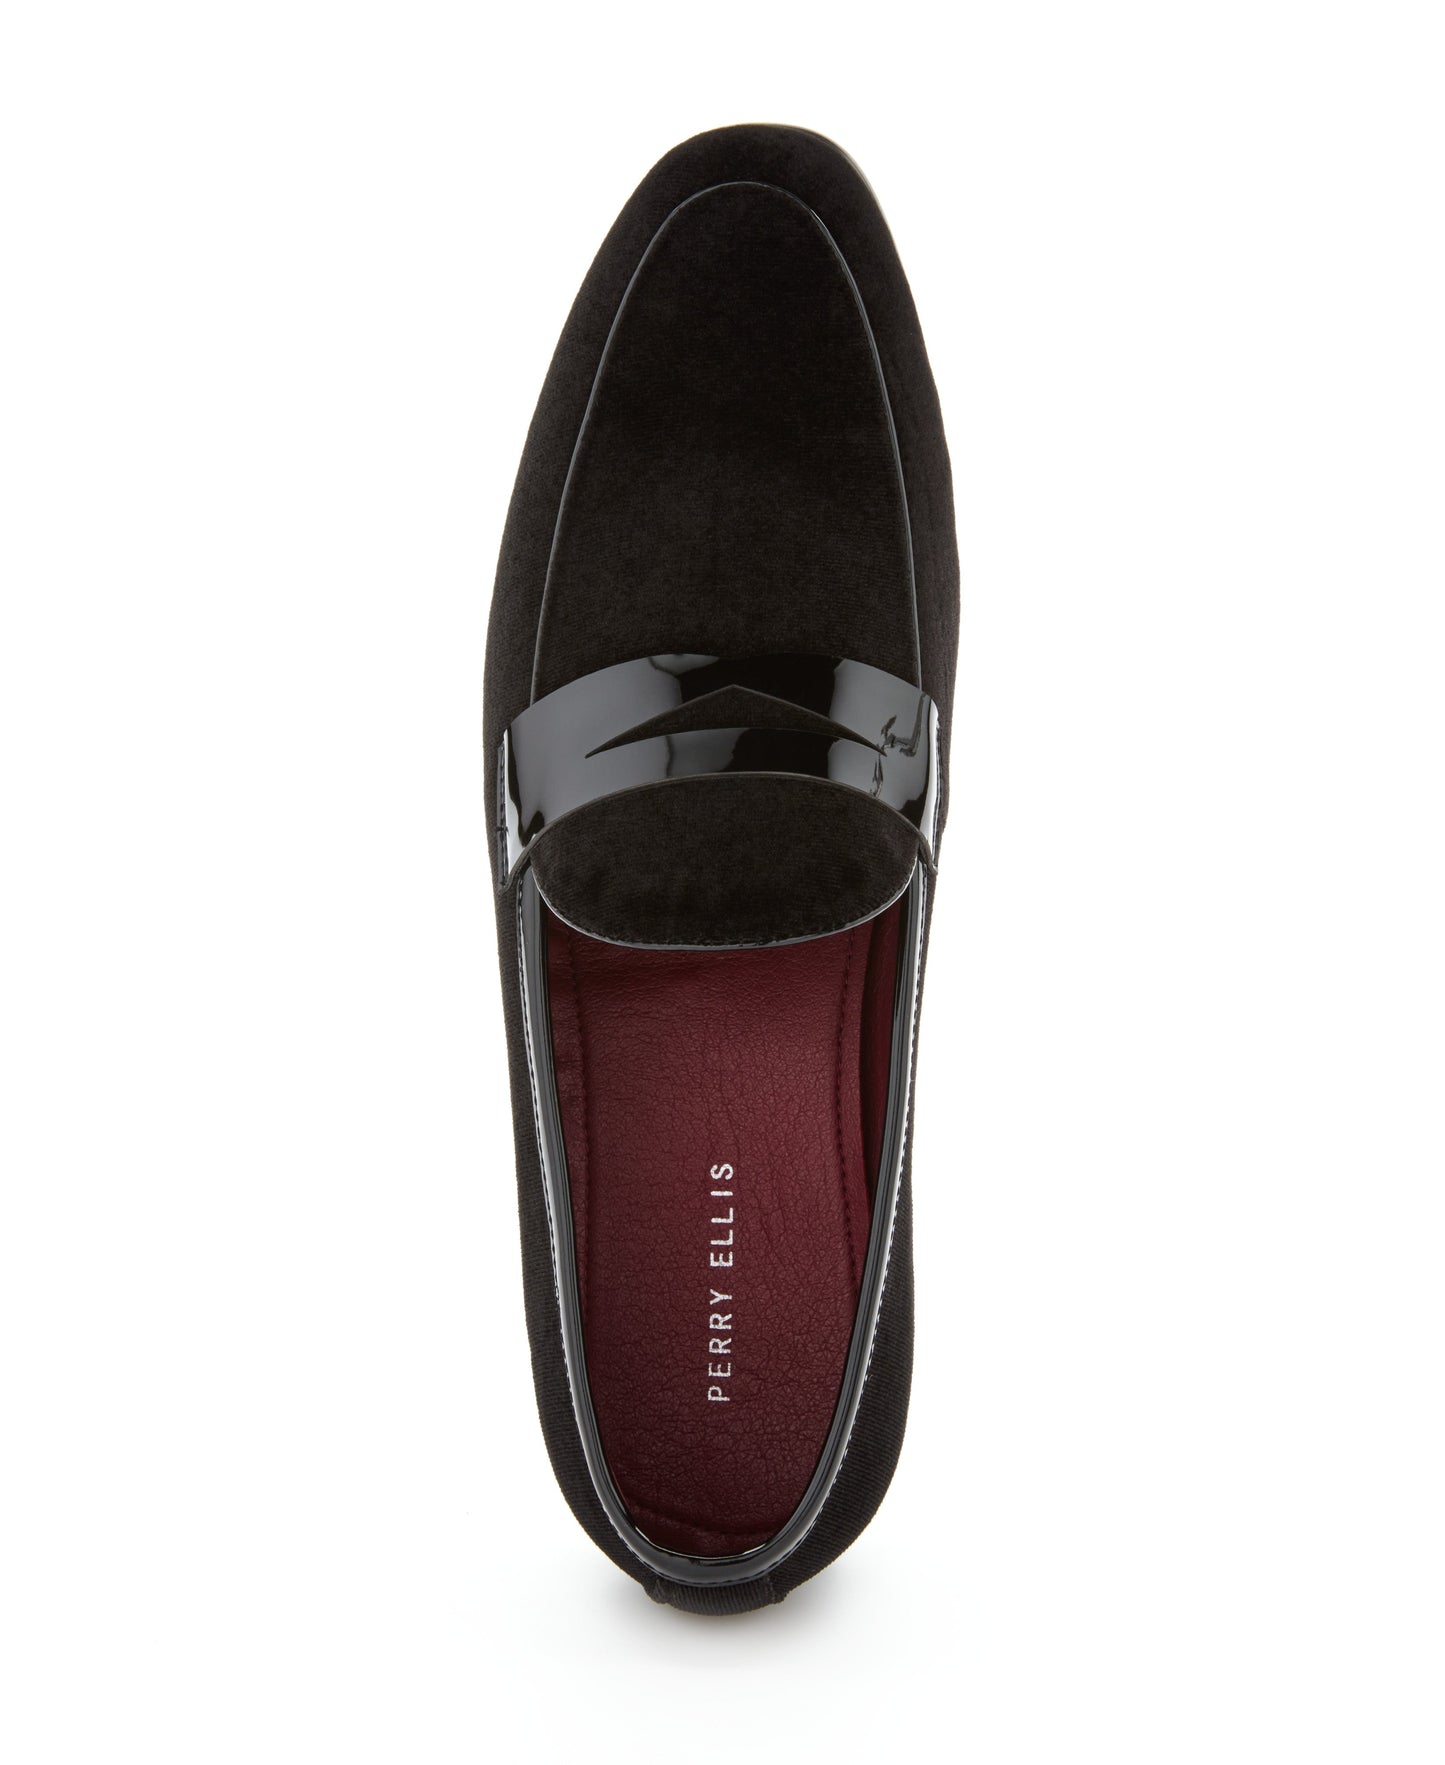 Genuine Suede Leather Penny Loafers